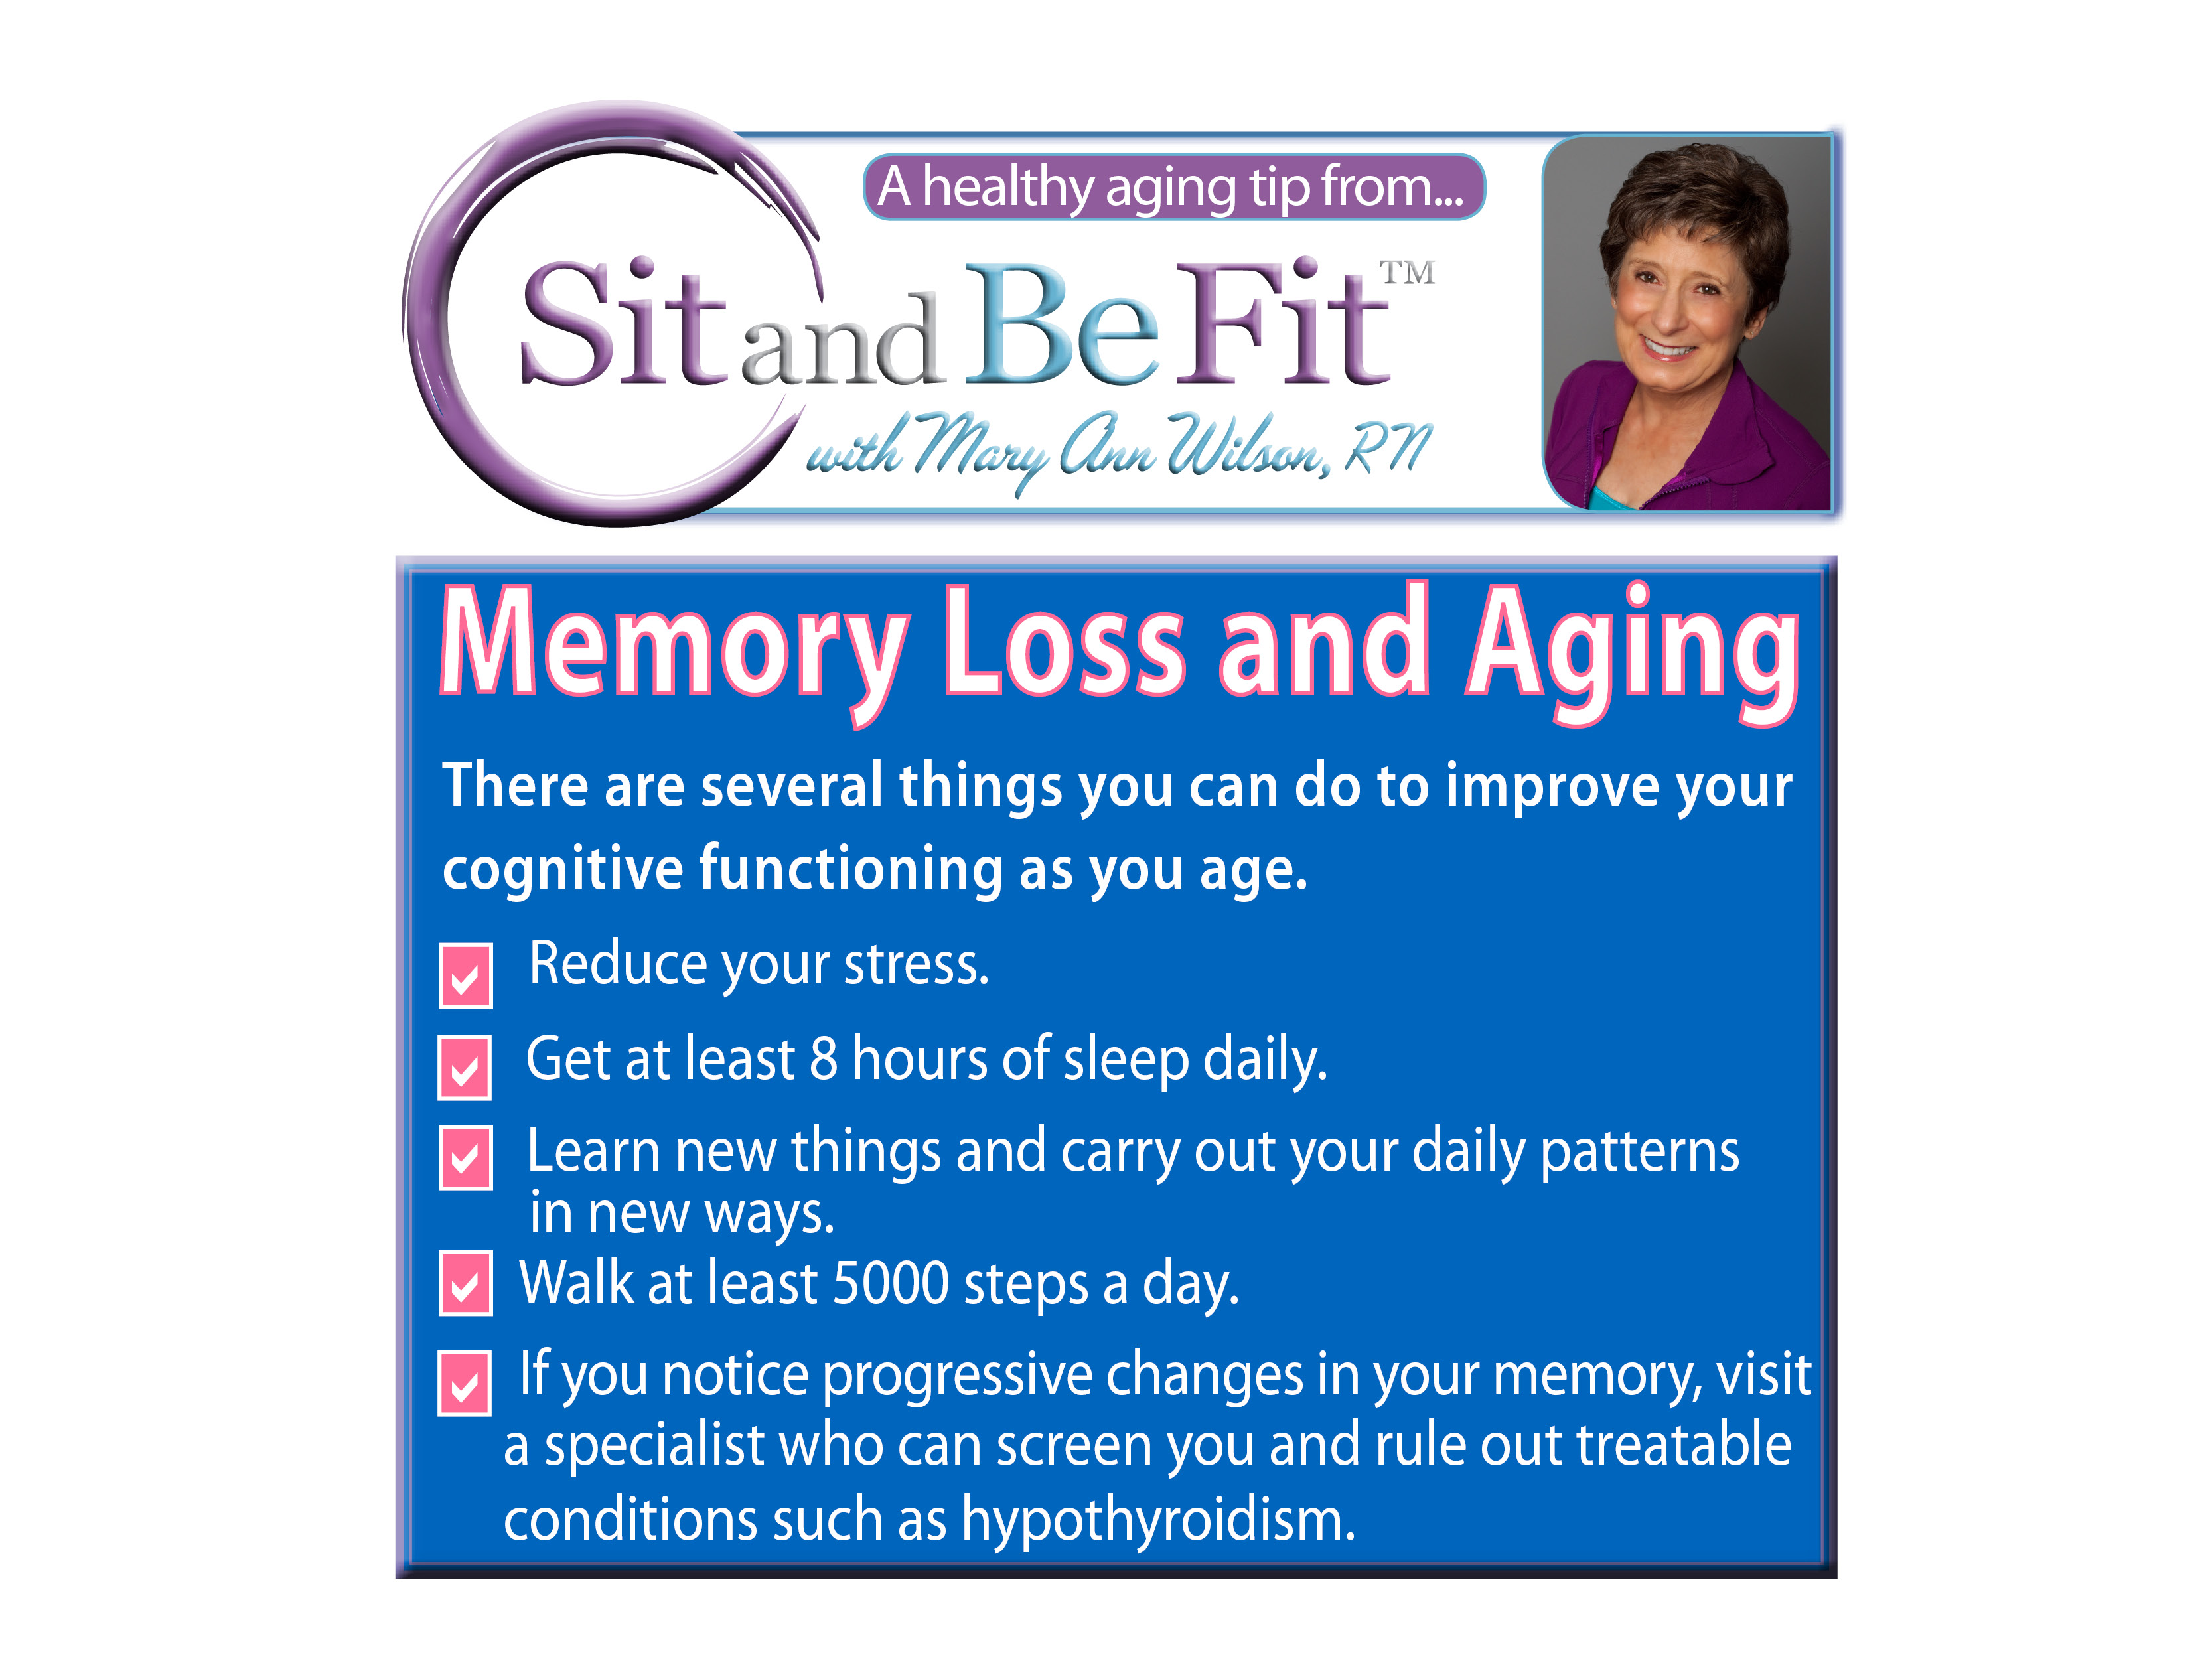 Sit and Be Fit TV host, Mary Ann Wilson, RN, shares tips on how to prevent memory loss